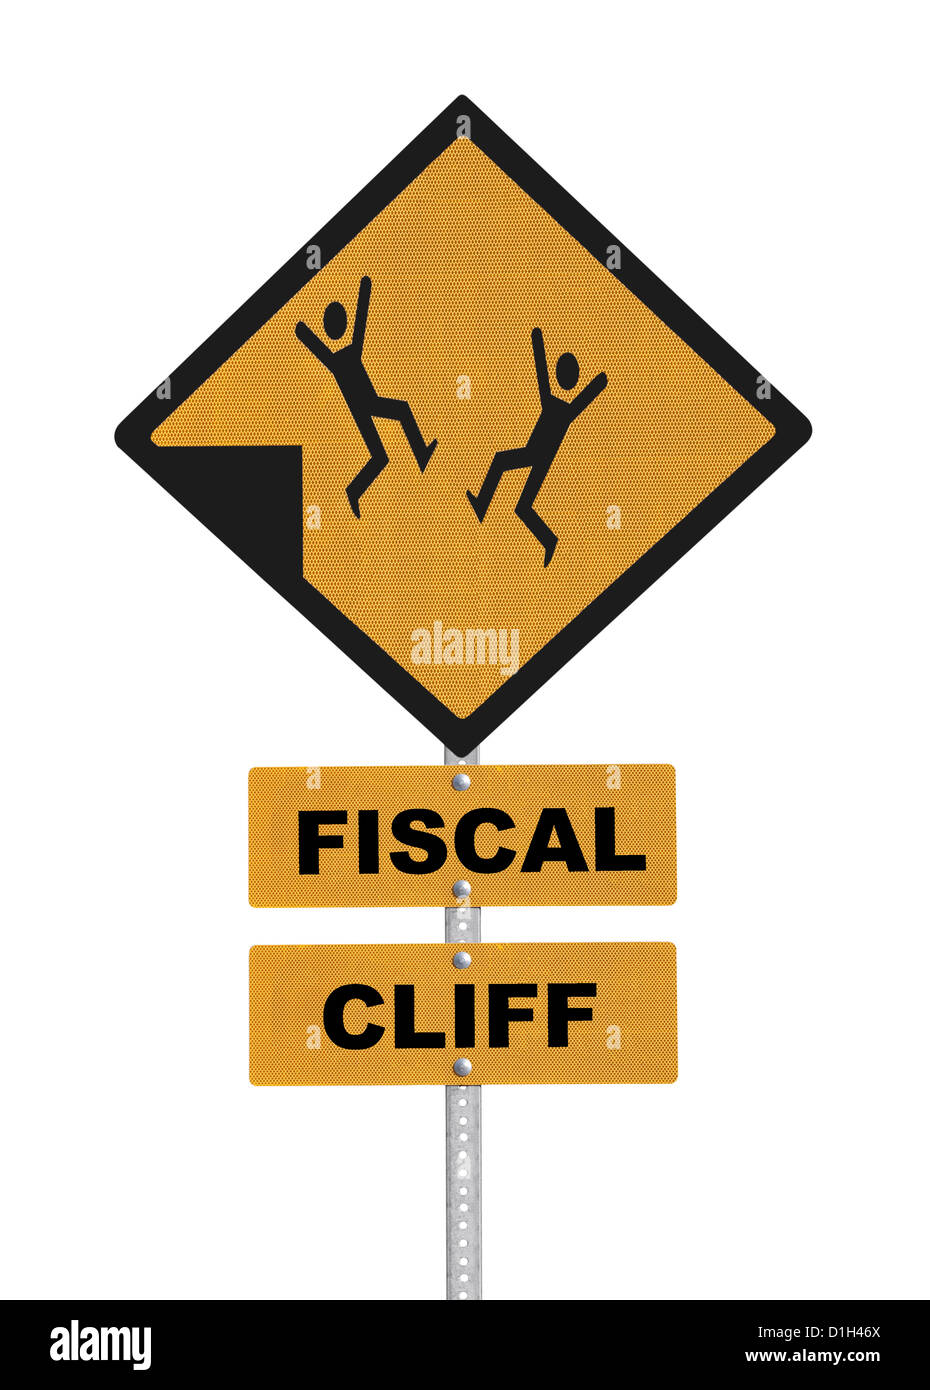 Fiscal cliff people falling warning sign isolated. Stock Photo